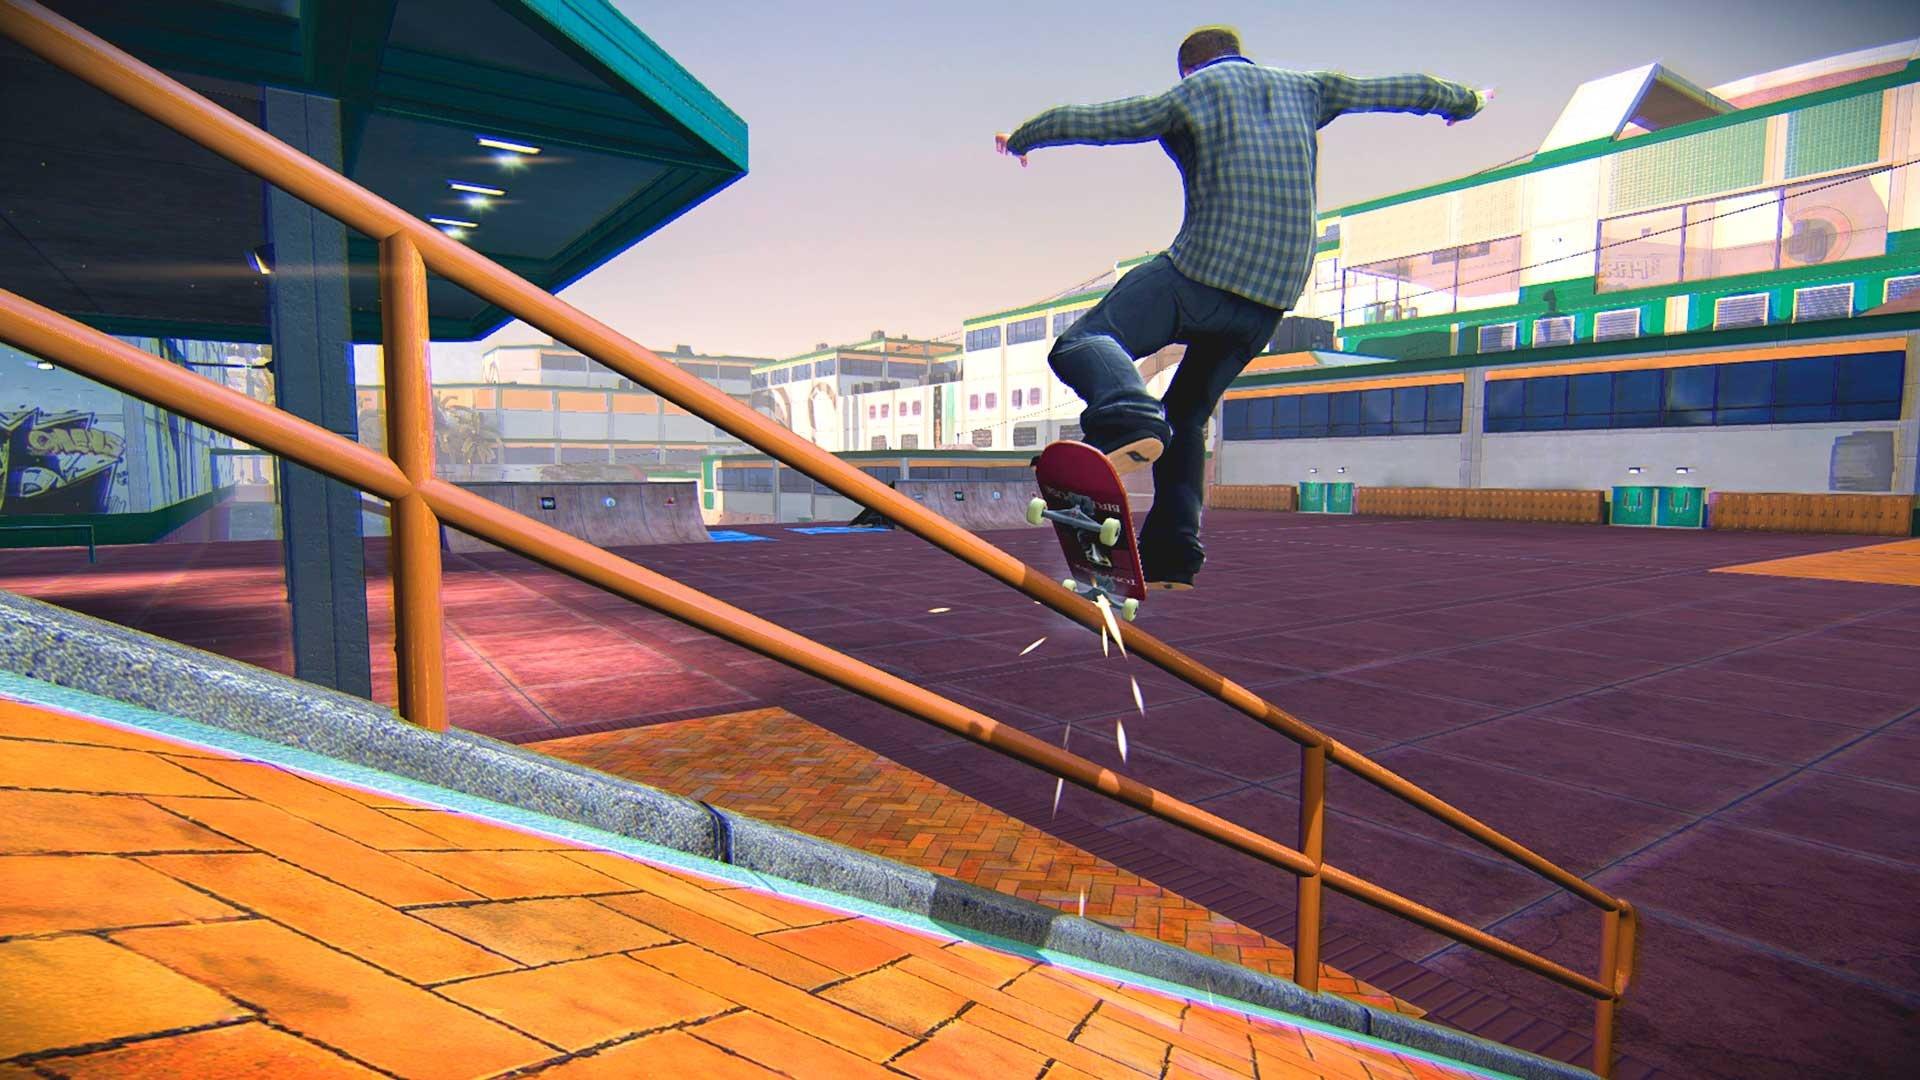 Tony Hawk's Pro Skater 5 Will Let You Create and Share Your Own